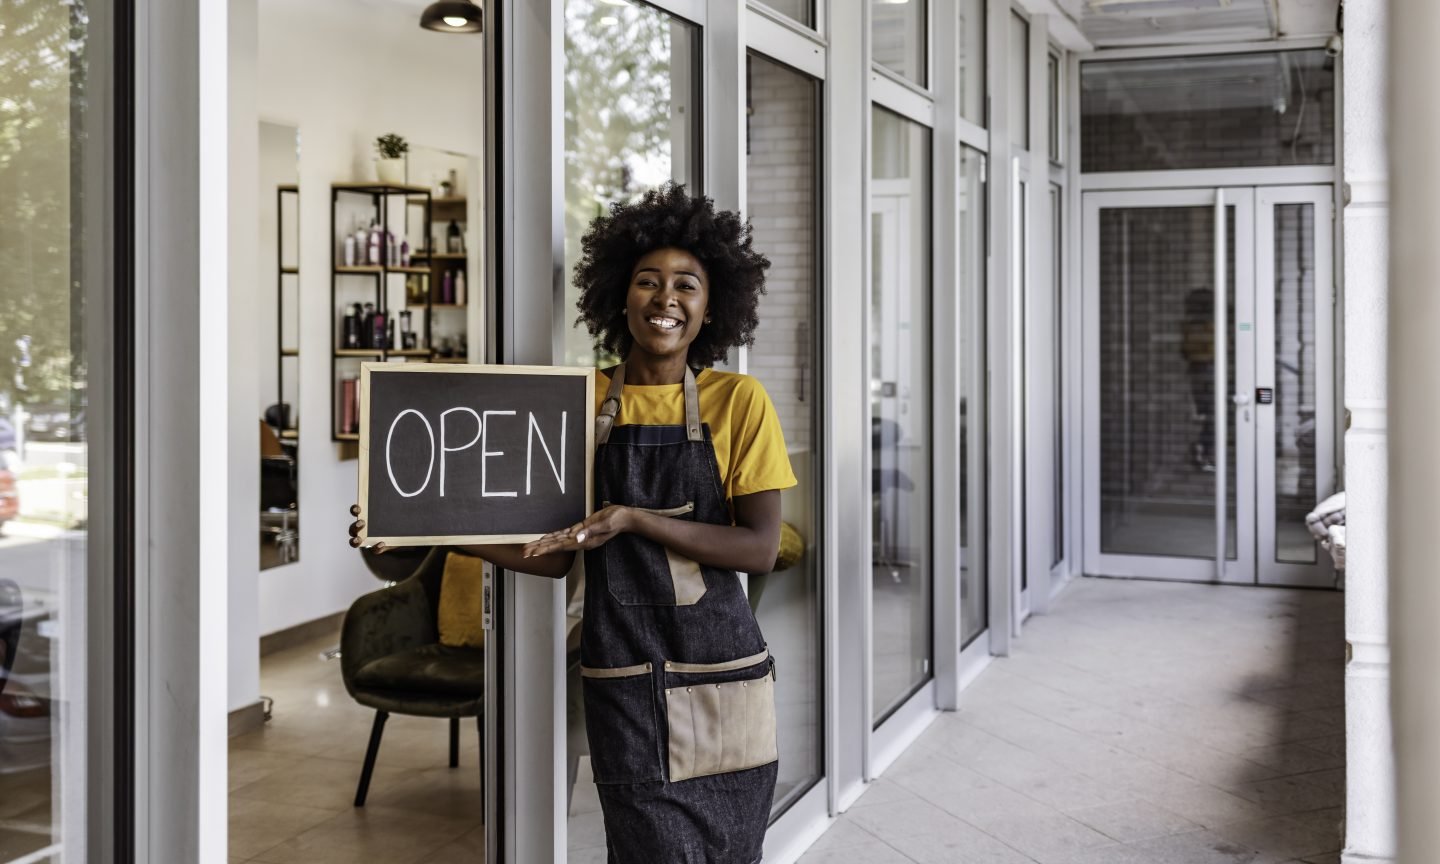 Do I Need a Business License for My Company? - NerdWallet